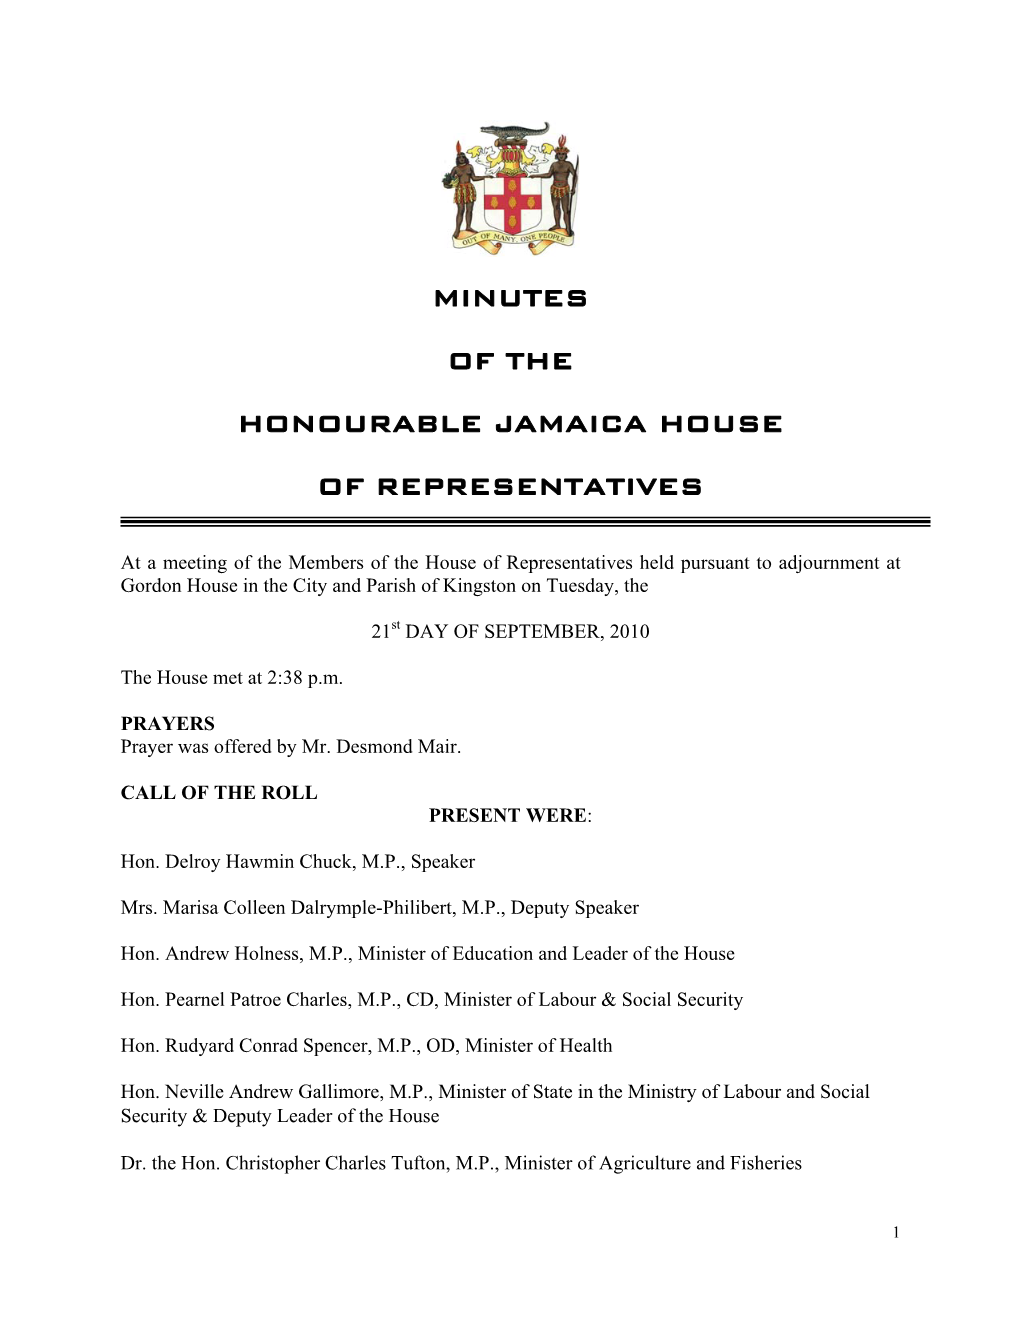 Minutes of the Honourable Jamaica House Of